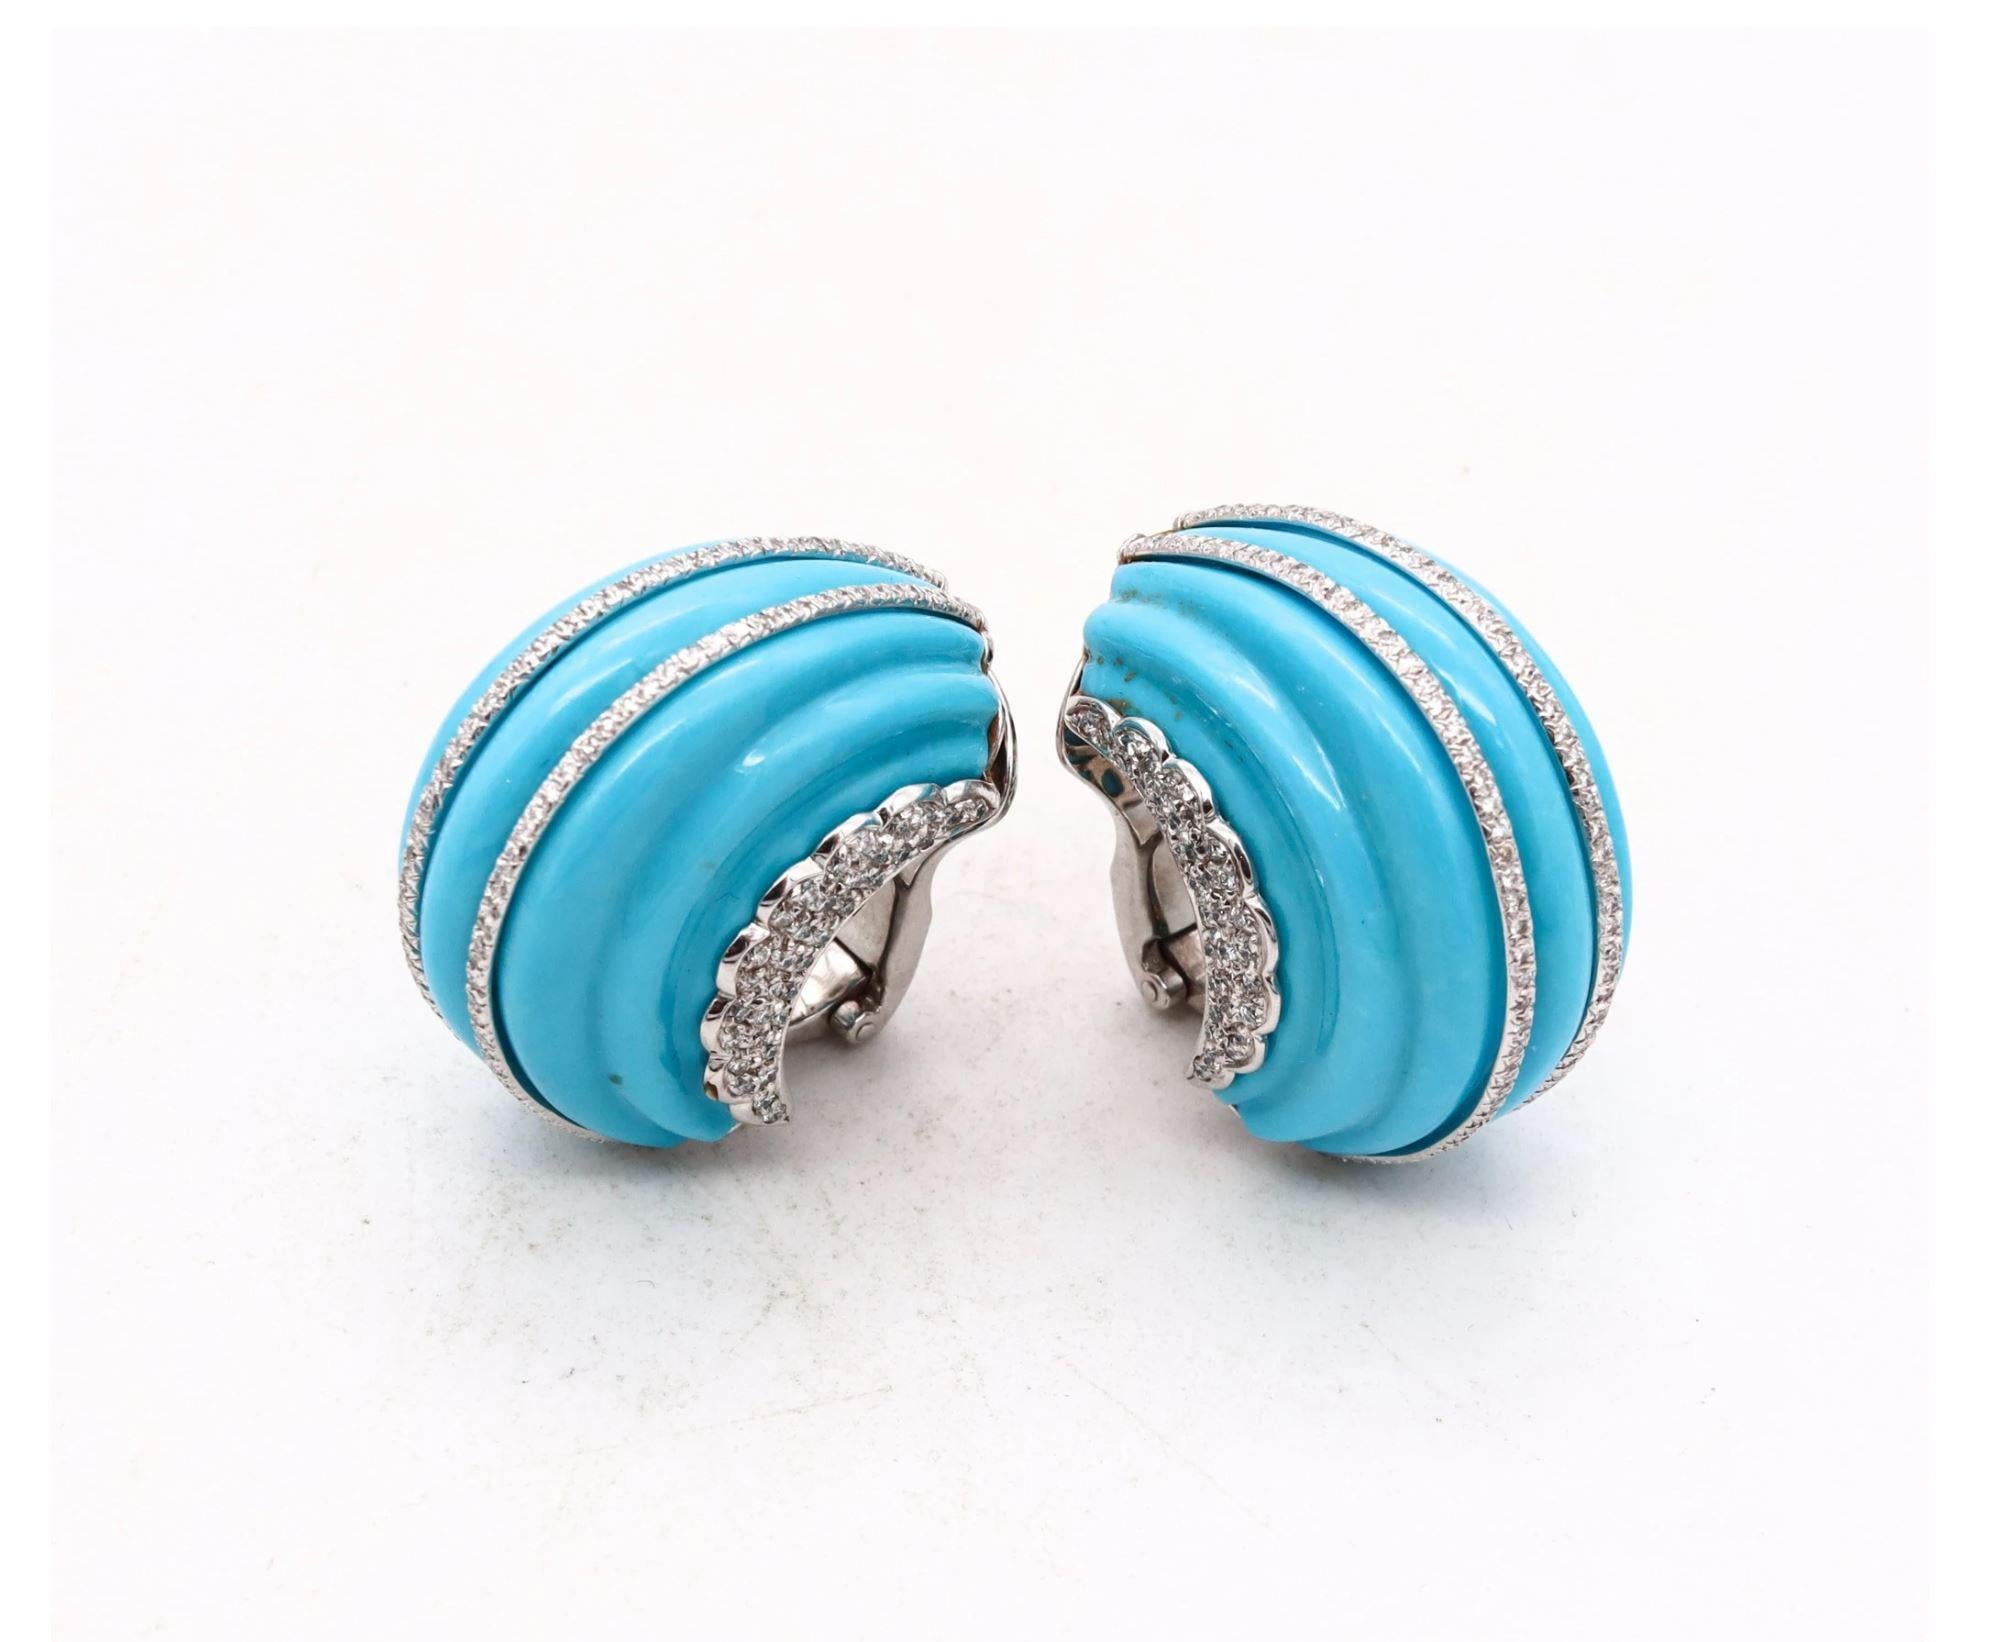 Modernist Fred Leighton New York Platinum Fluted Earrings 2.72Cts Diamonds & Turquoises